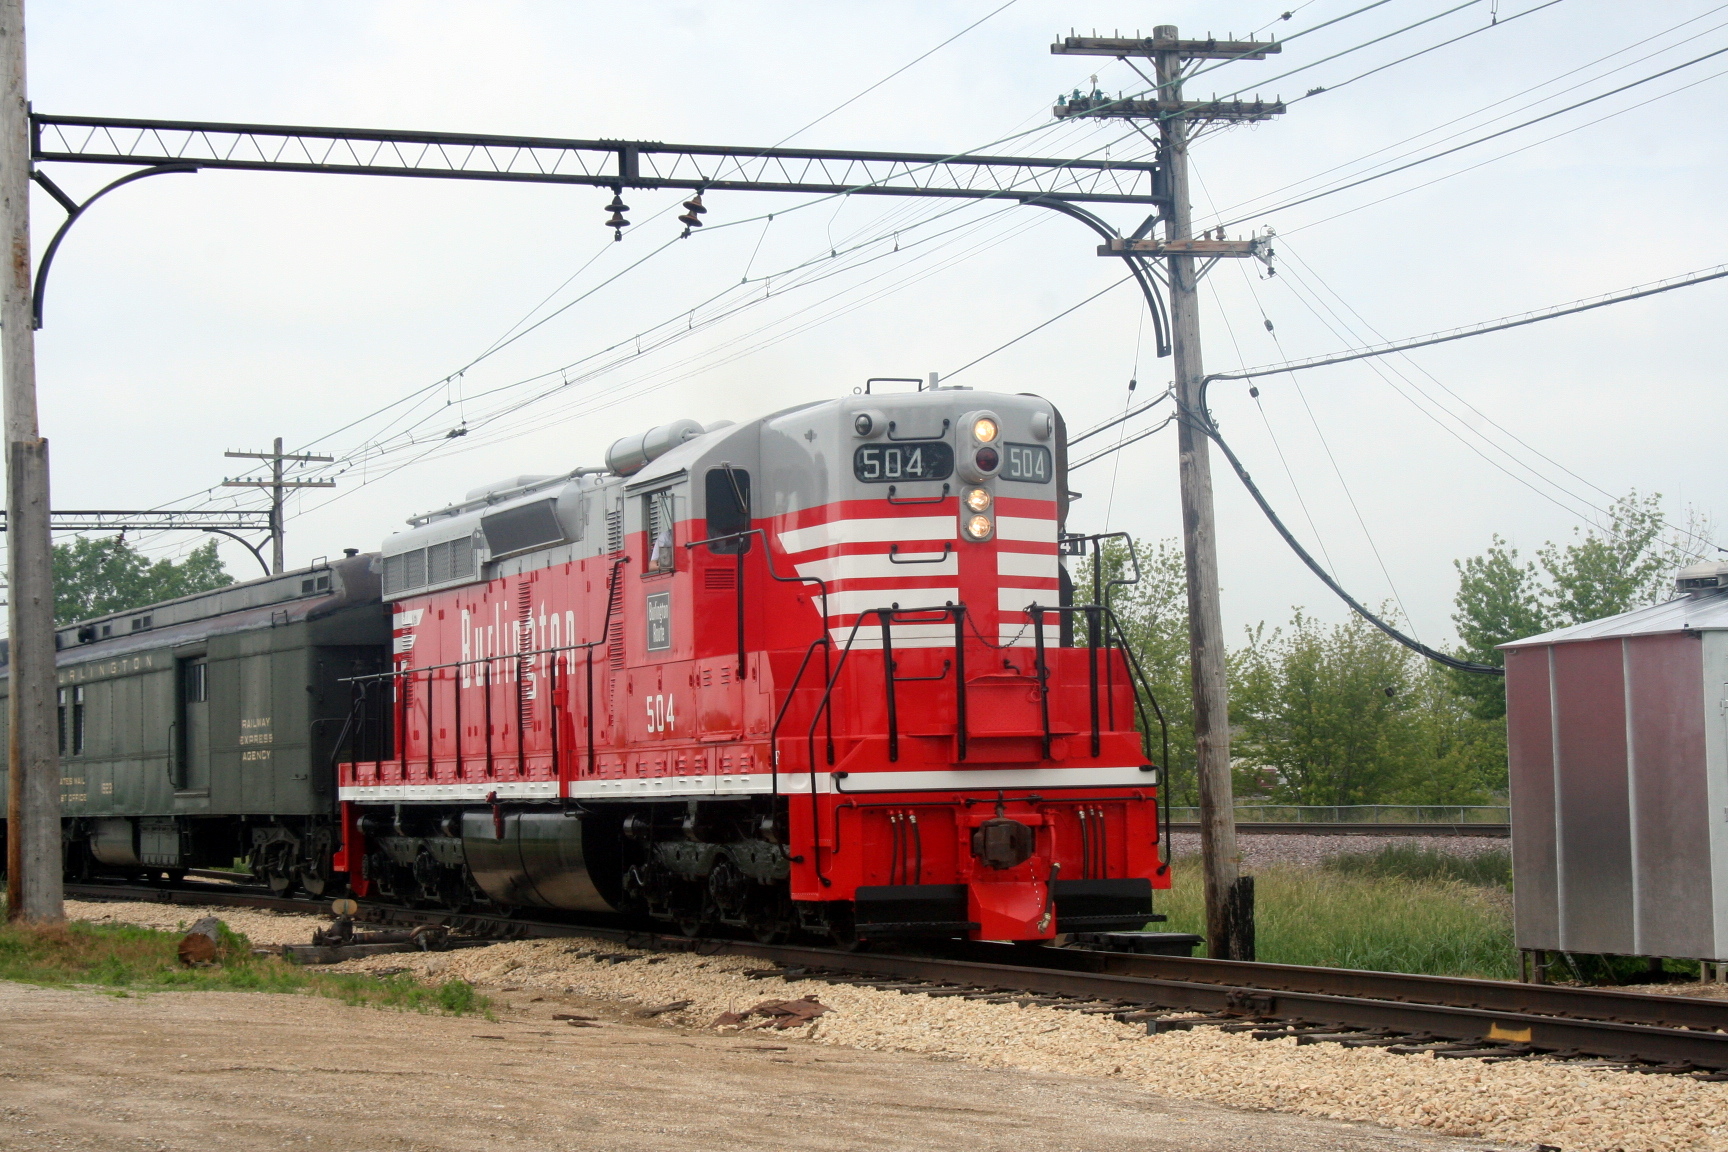 a red and gray passenger train on railroad tracks